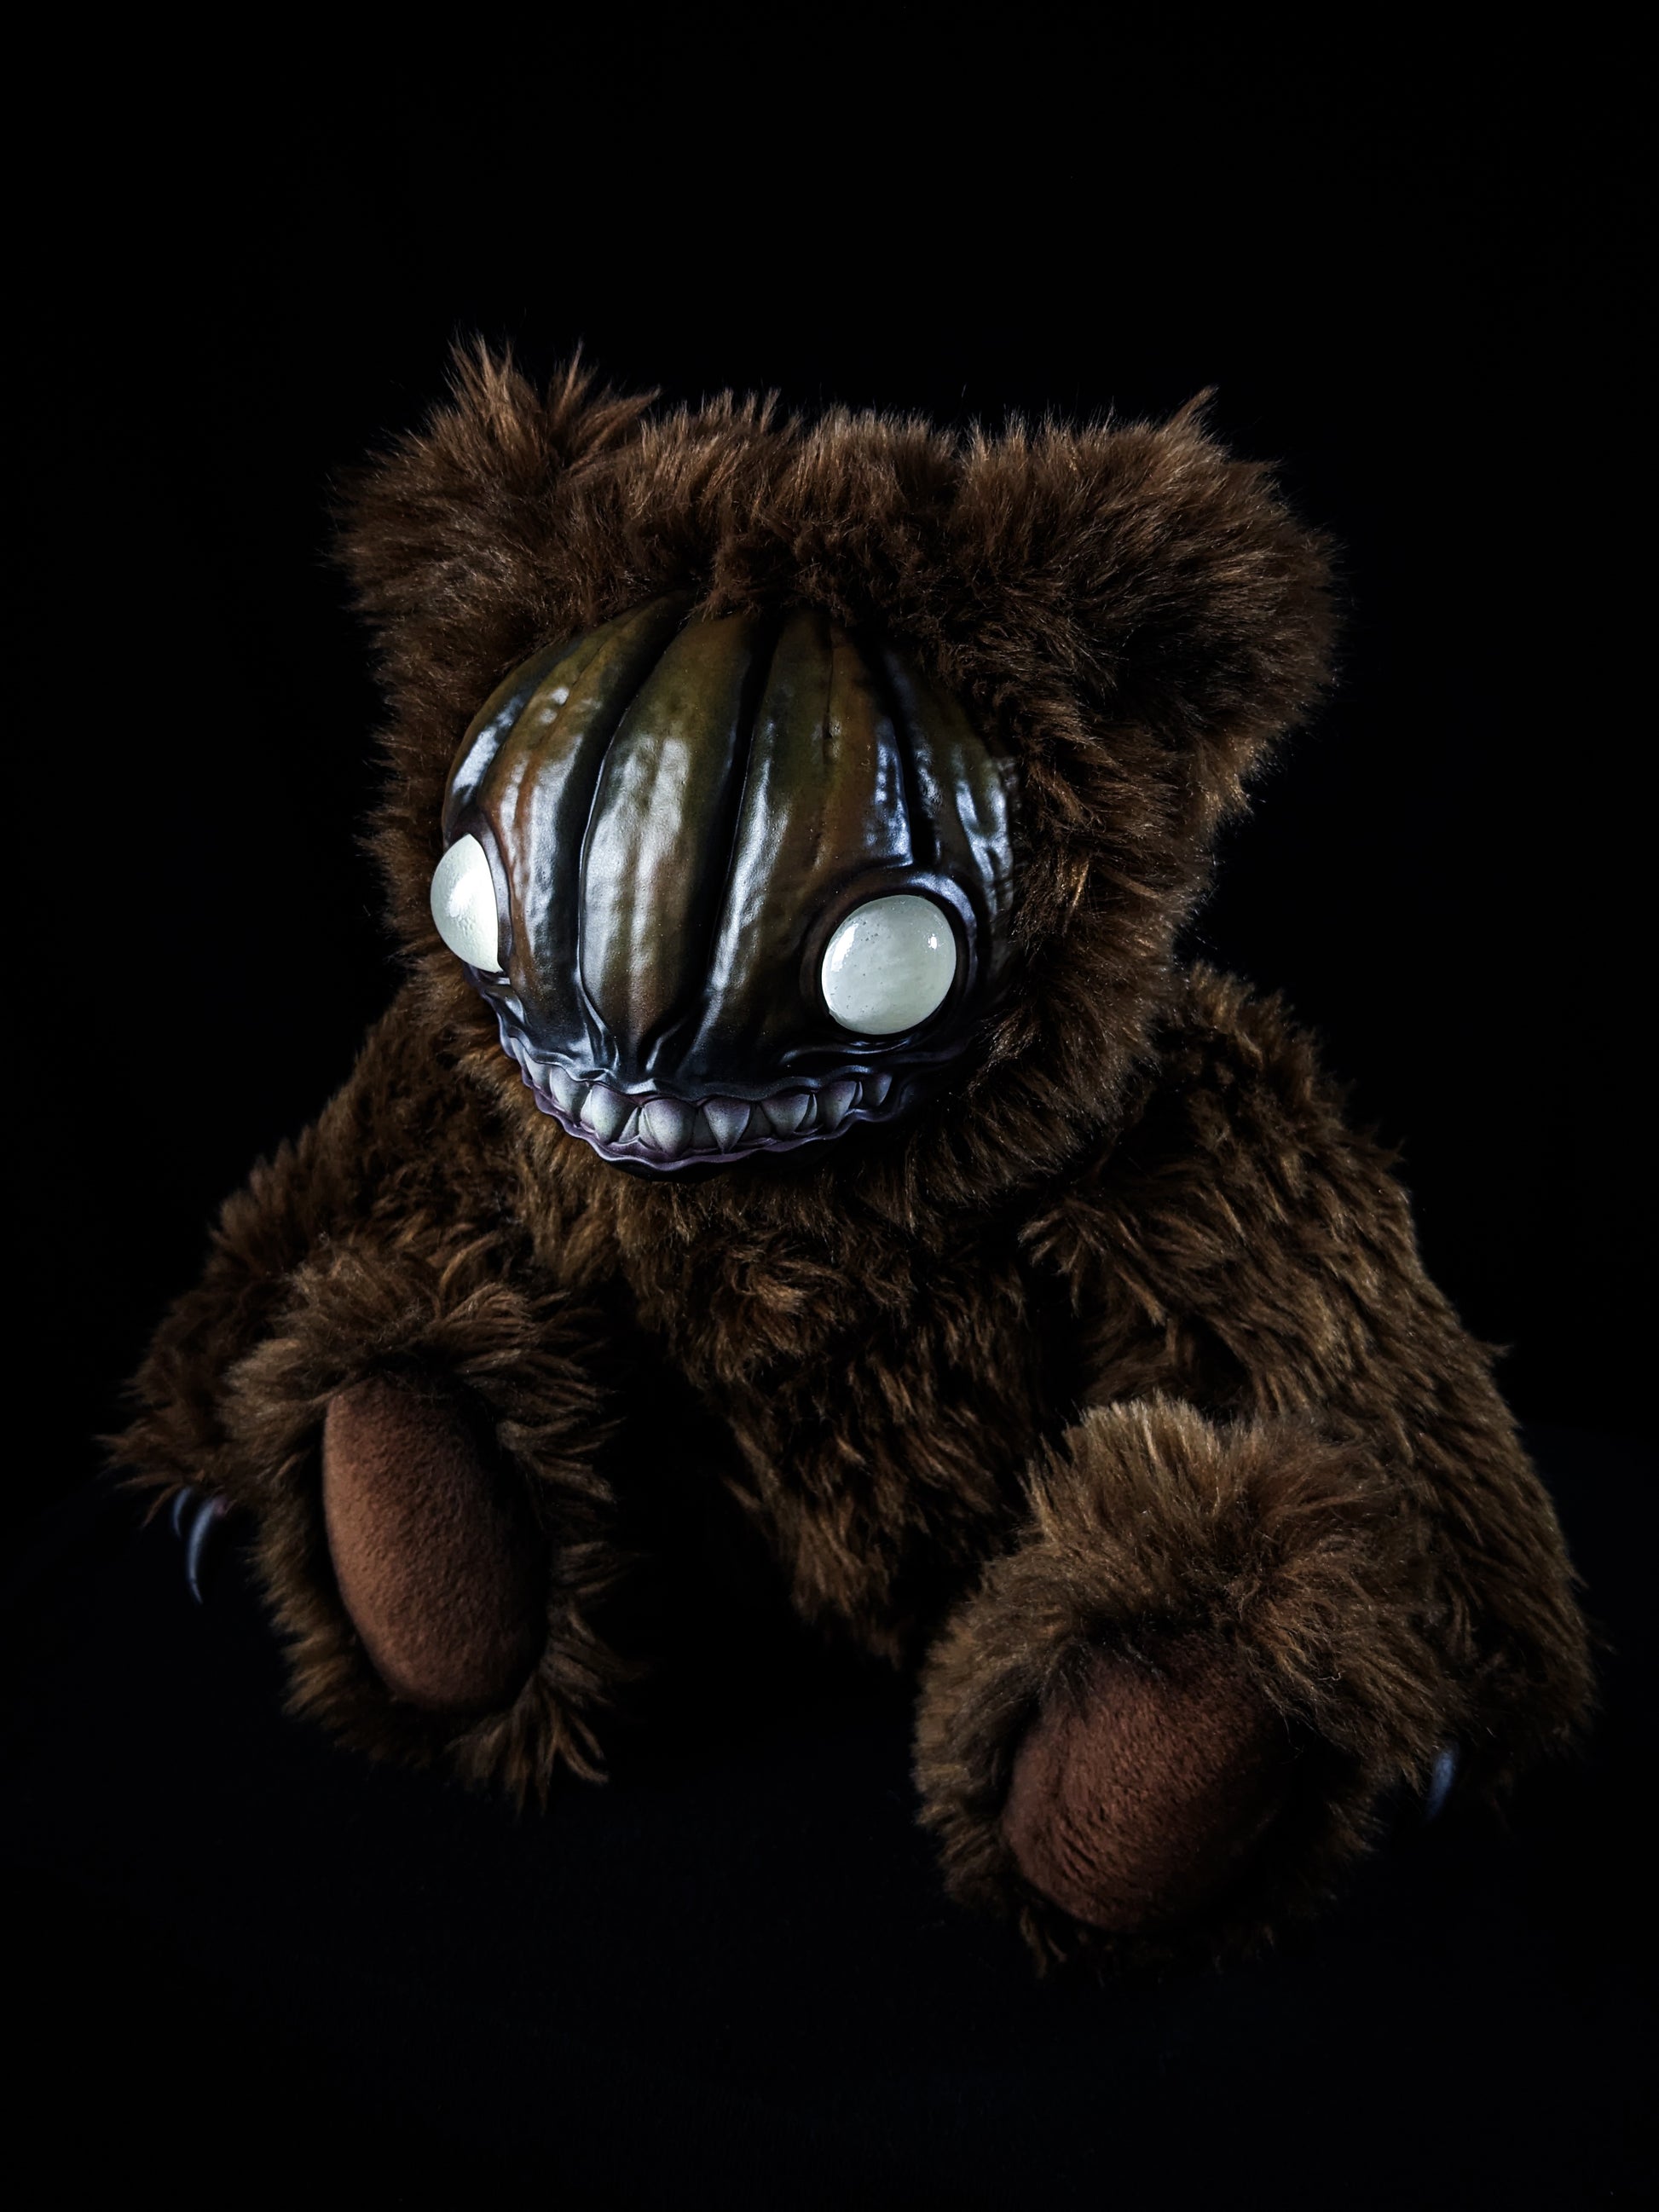 Overripe Ripper: HAUNTVESTER - CRYPTCRITZ Handcrafted Creepy Cute Halloween Pumpkin Art Doll Plush Toy for Spooky Souls